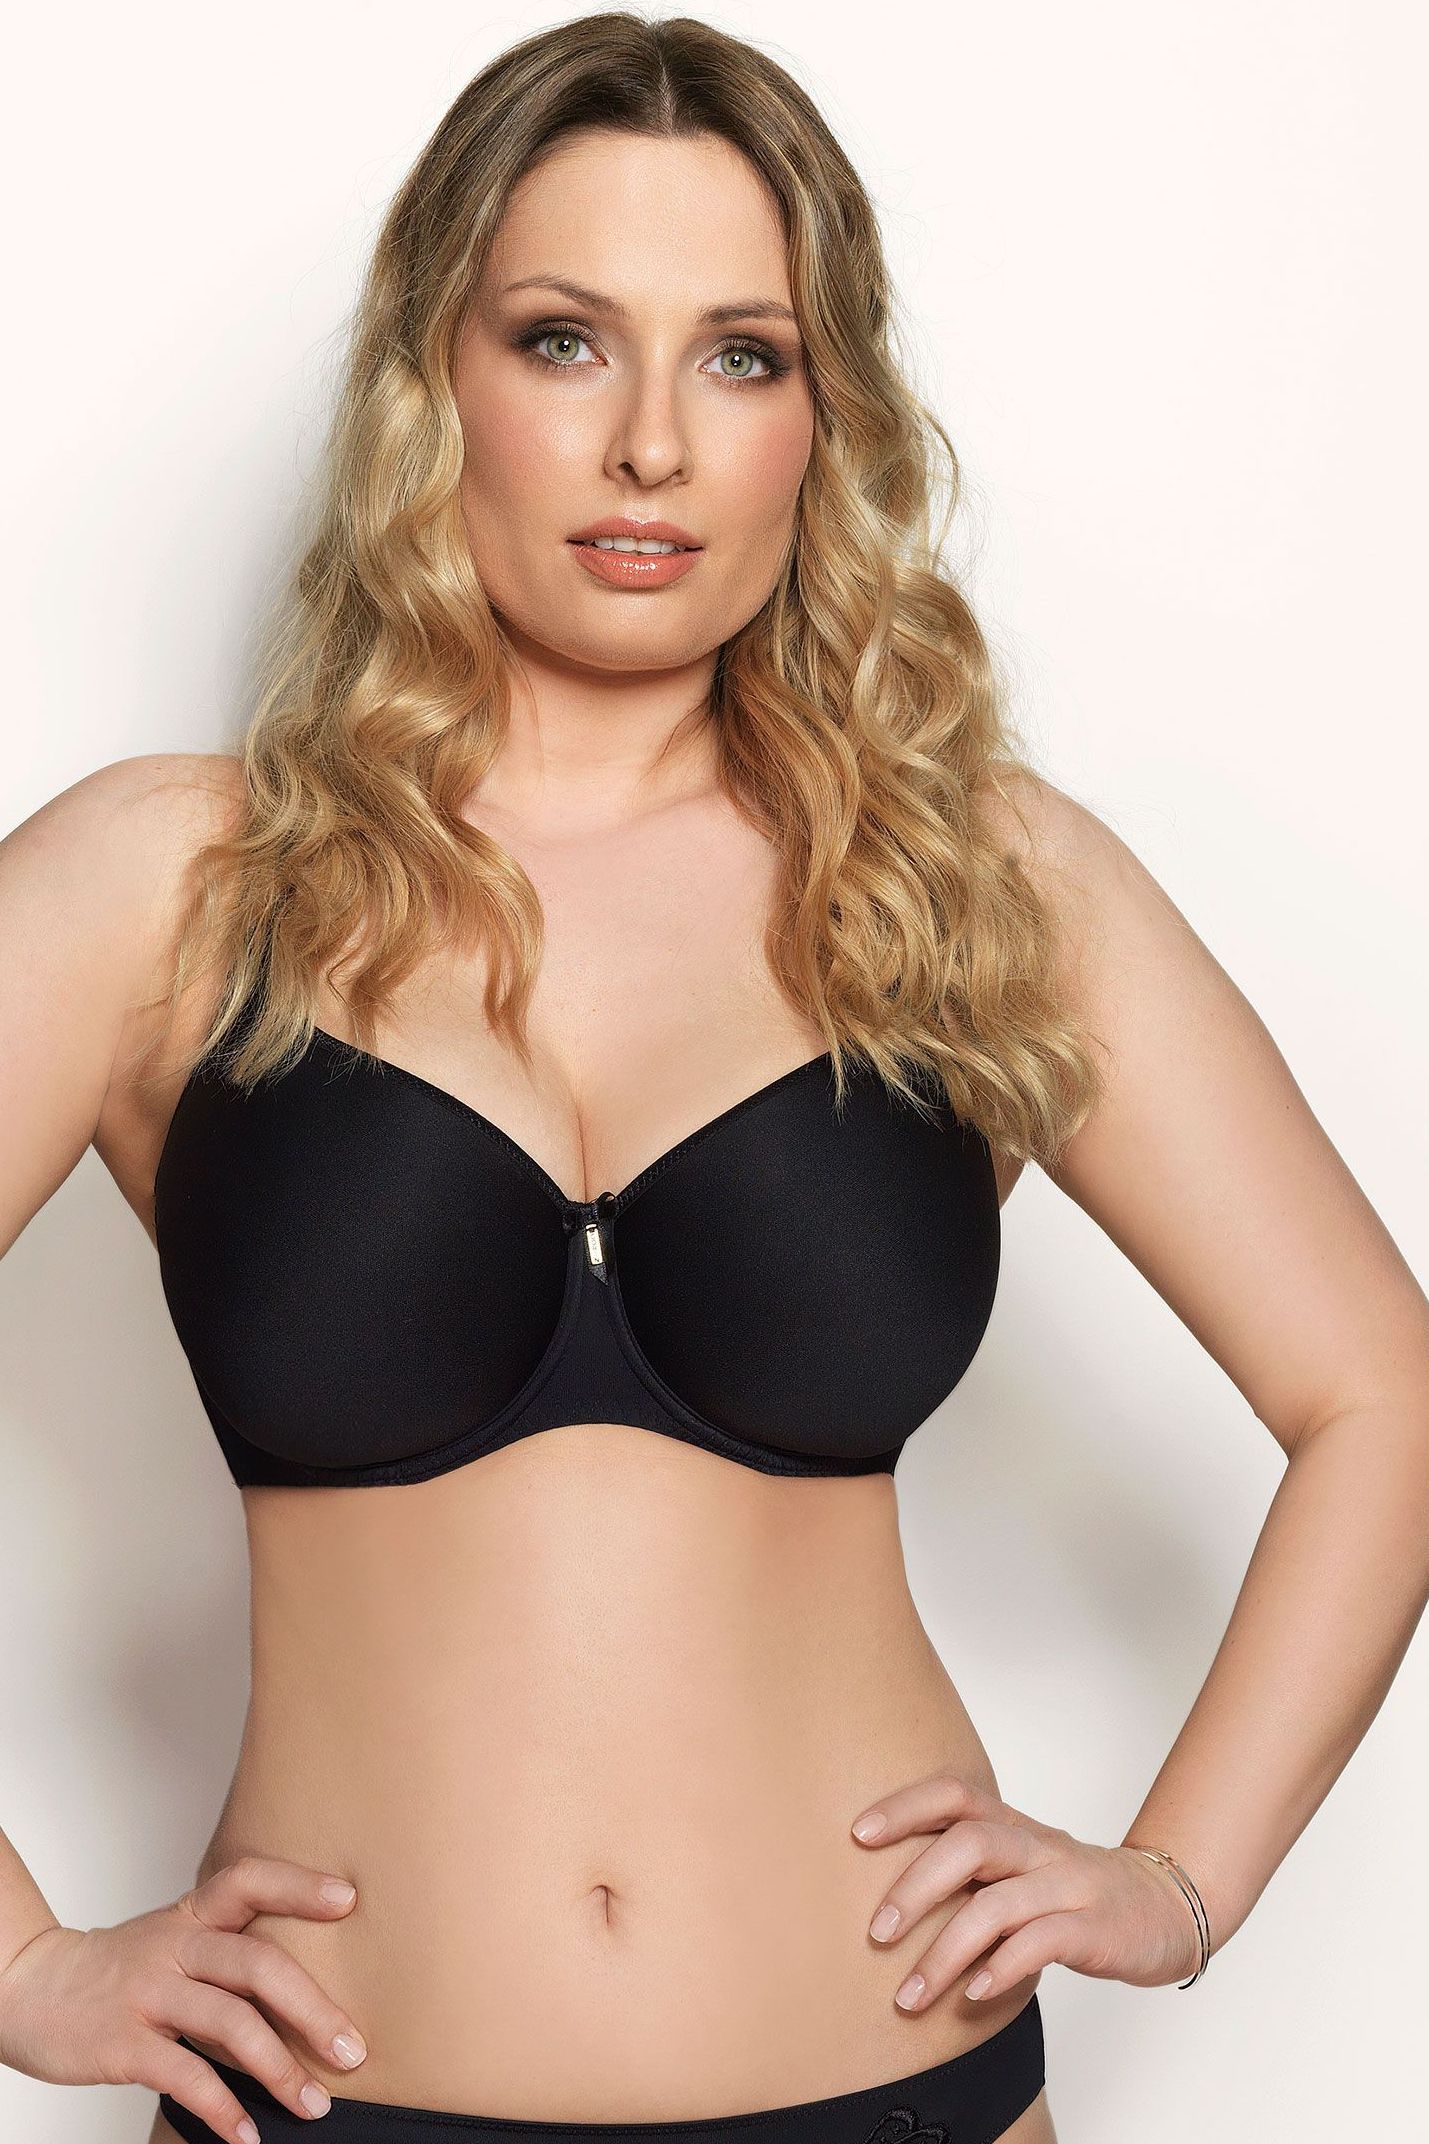 Women's quality full cup bras by Corin made in Poland –